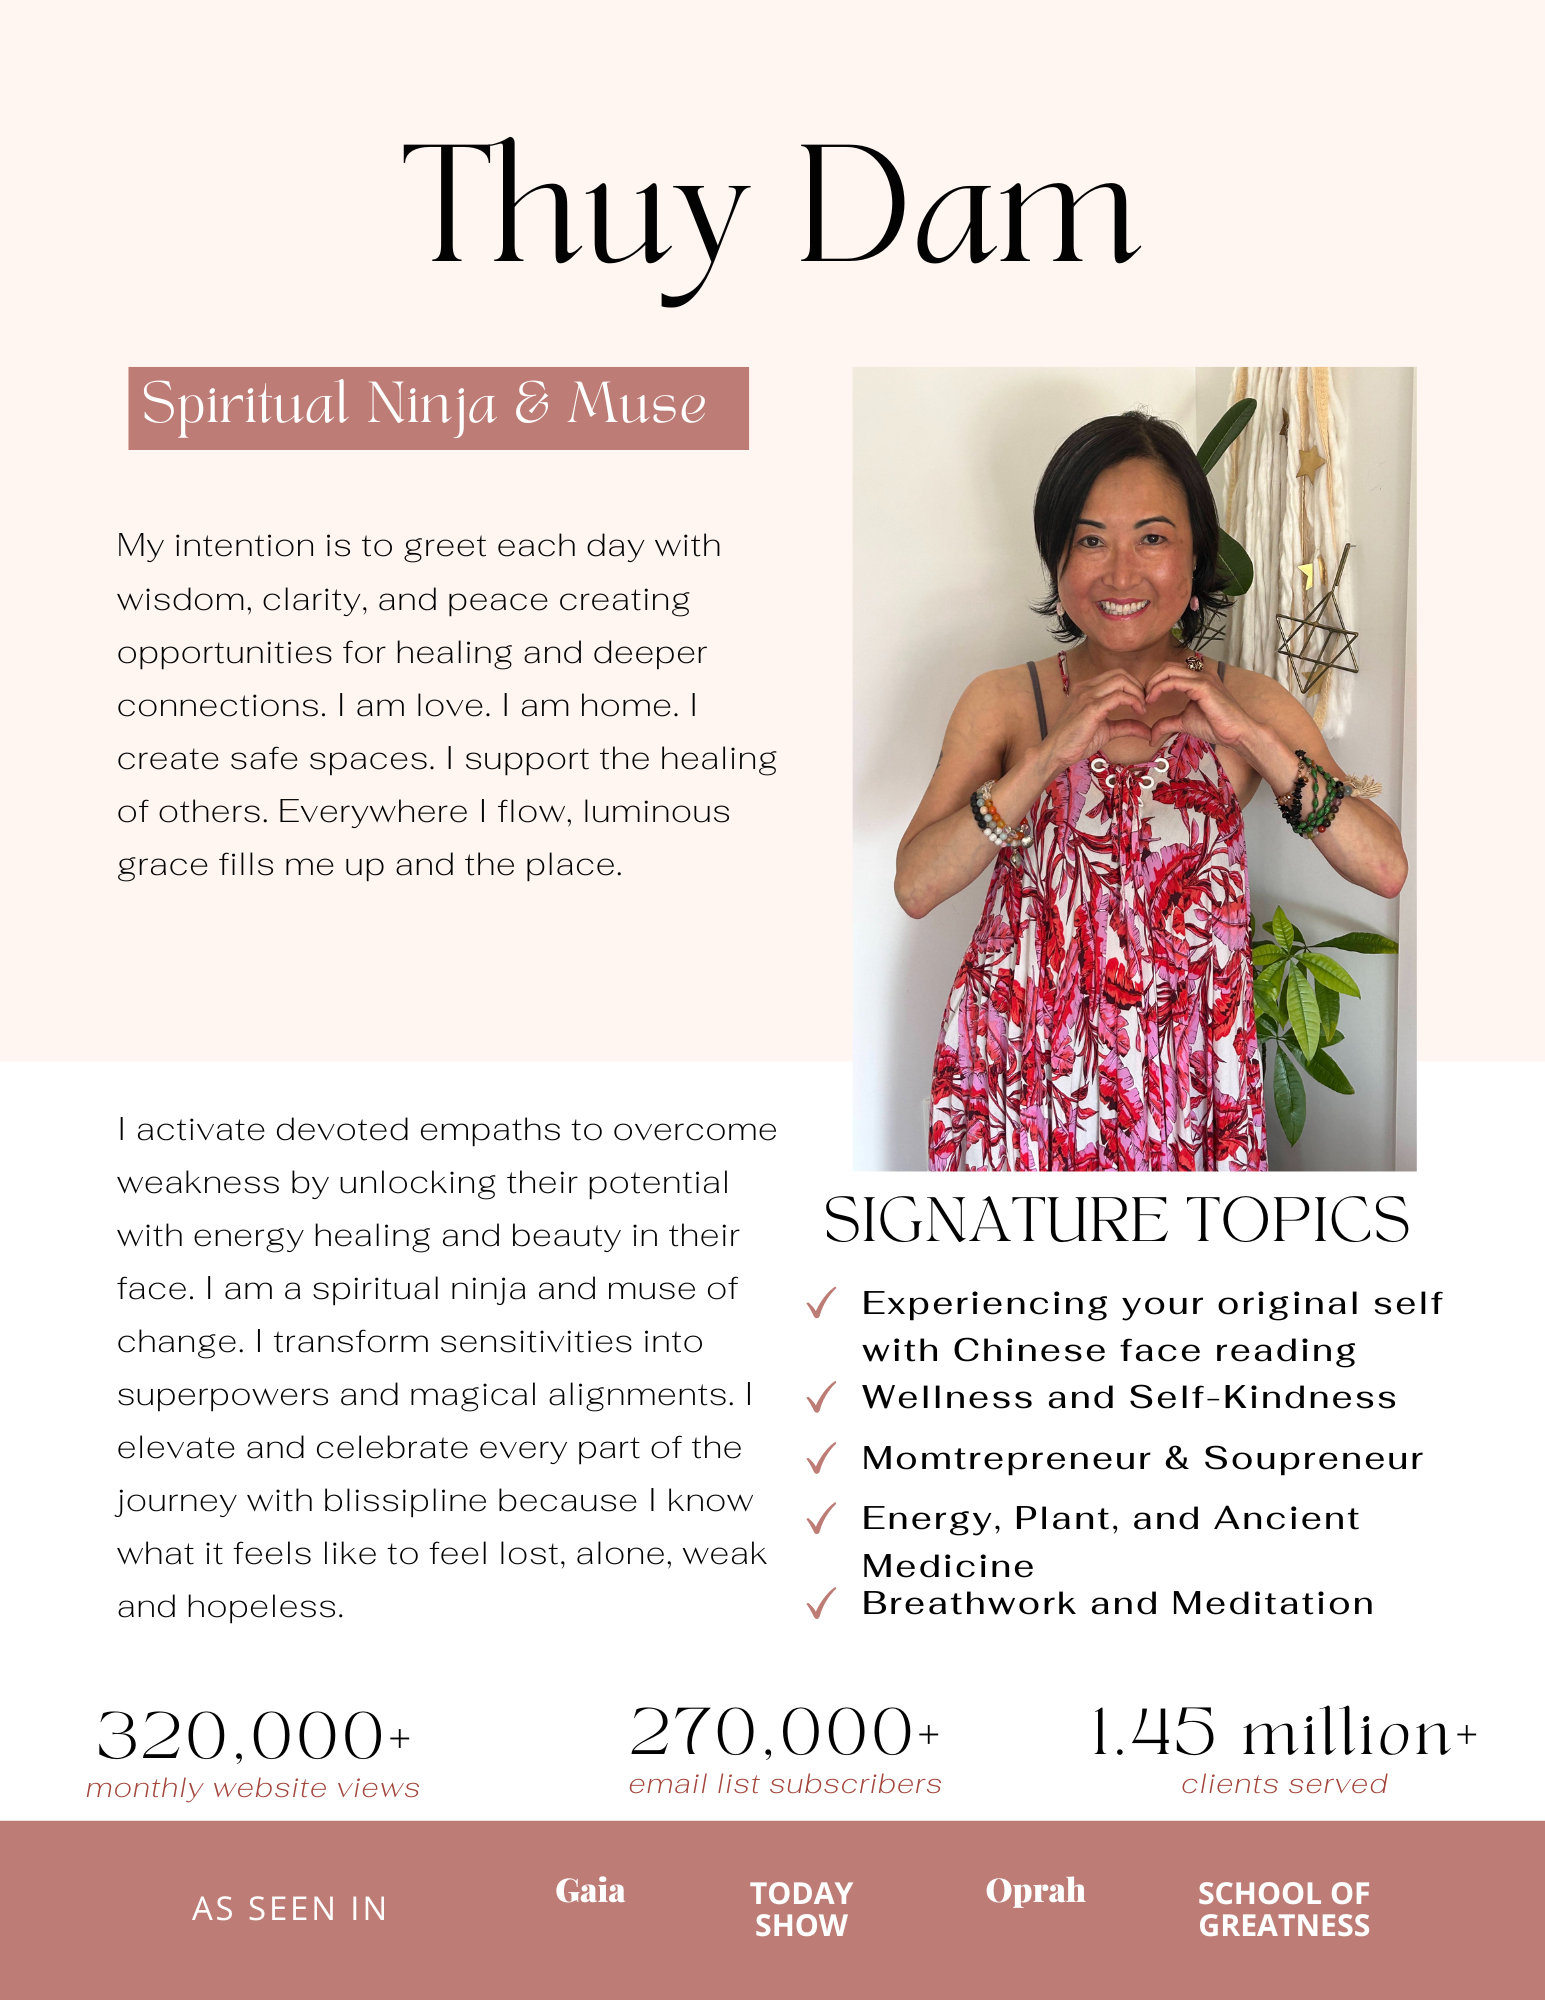 thuy dam vision and purpose